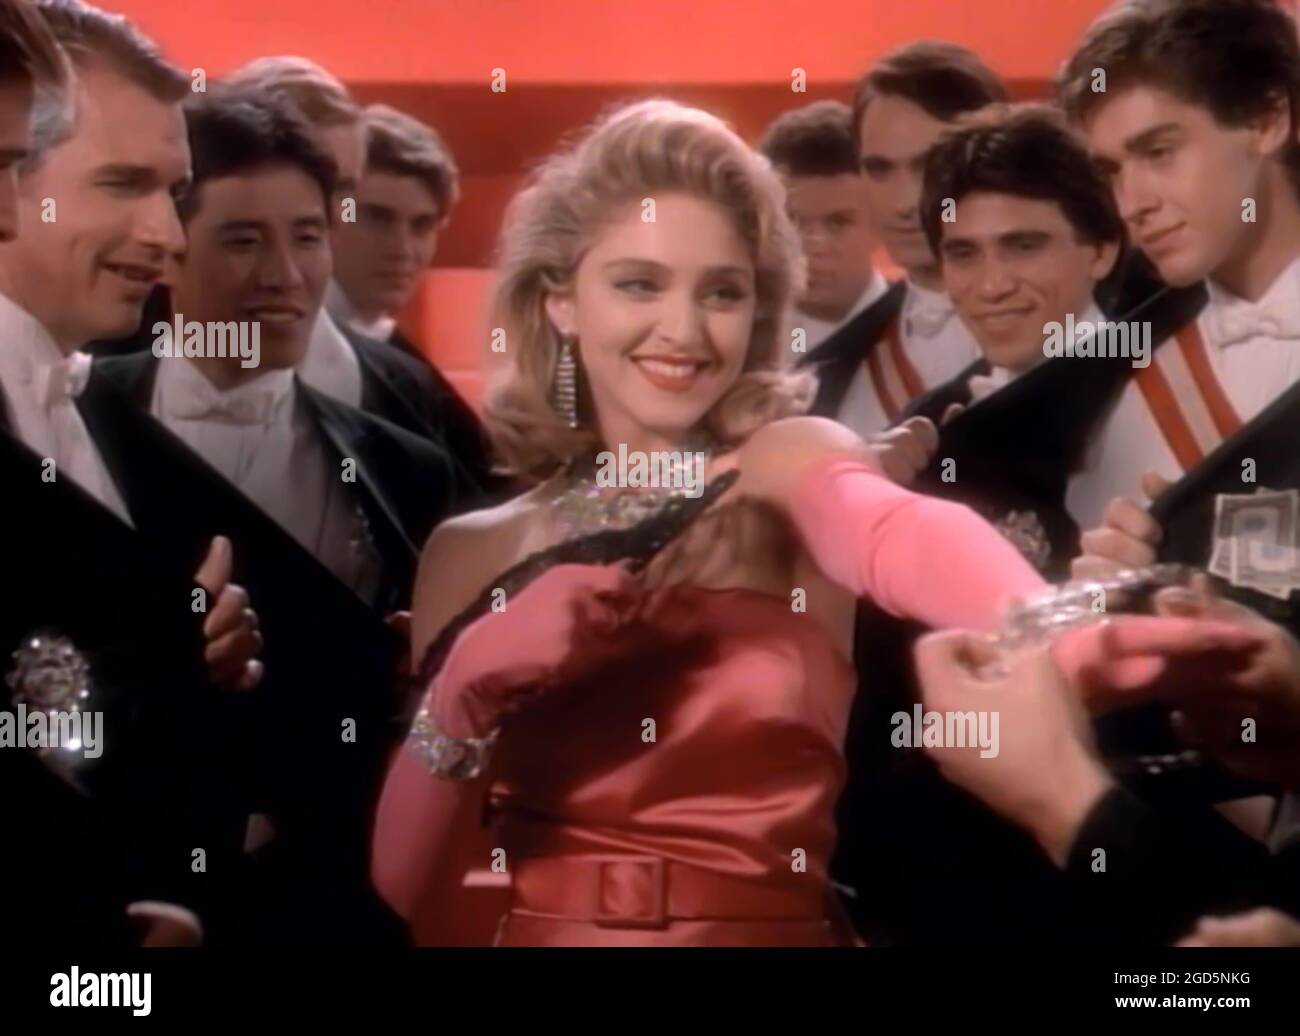 https://c8.alamy.com/comp/2GD5NKG/classic-music-videos-los-angeles-usa-1984-madonna-in-the-video-for-her-single-material-girl-sire-produced-by-nile-rodgers-the-video-also-features-keith-carradine-as-a-successful-film-director-who-pretends-to-be-poor-captioned-3-july-2013-ref-lmk115-44583c-030713-supplied-by-lmk-media-editorial-only-lmk-media-is-not-the-copyright-owner-of-these-film-or-tv-stills-but-provides-a-service-only-for-recognised-media-outlets-2GD5NKG.jpg